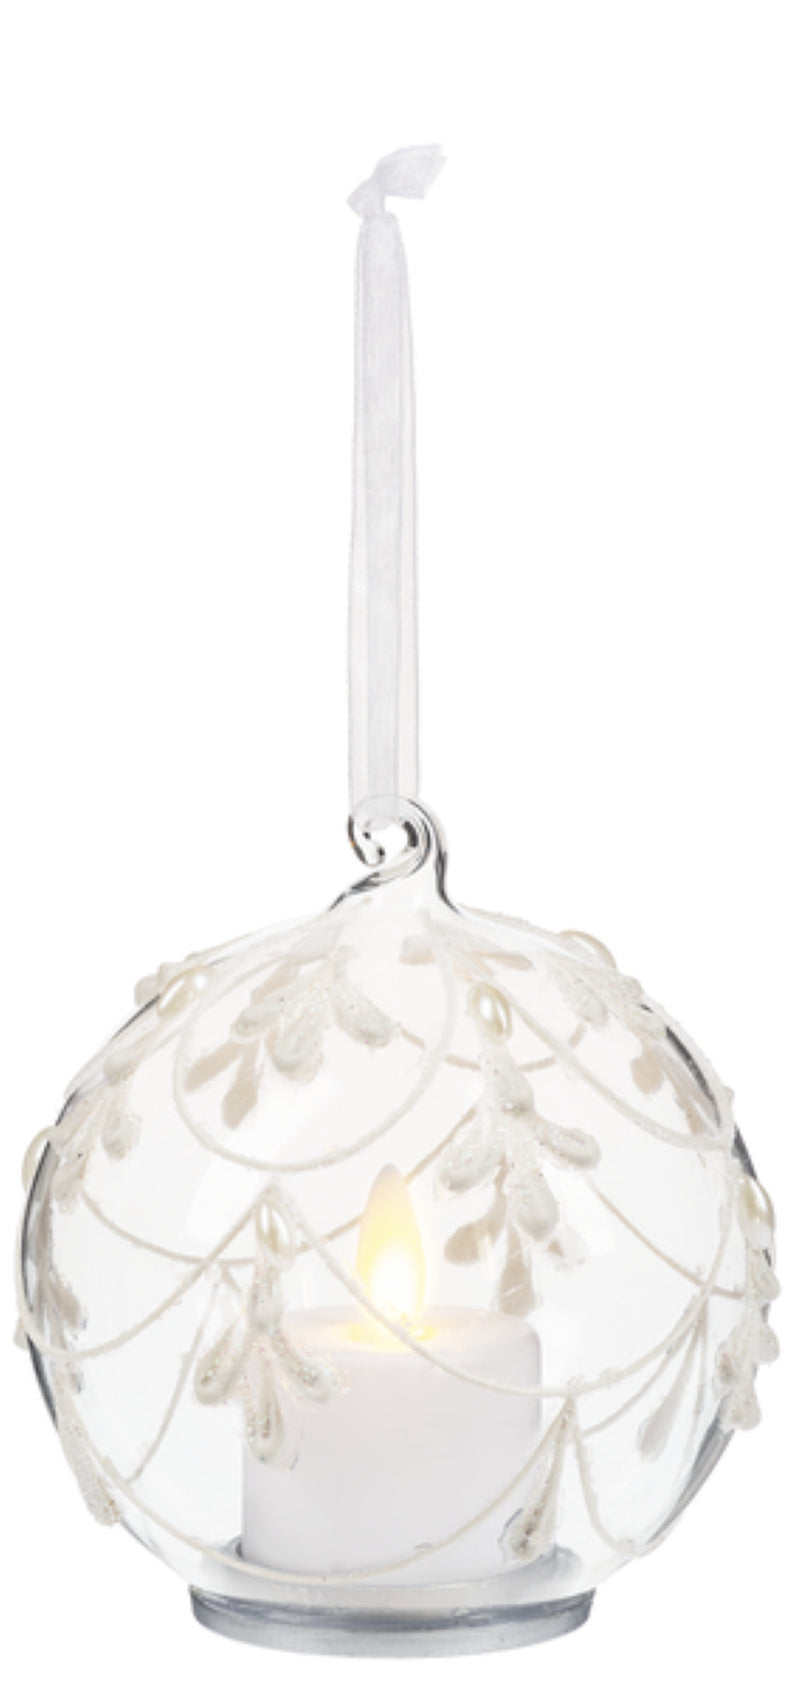 Icicle Ball Ornament with Flickering Flame LED - Curvy Lines - The Country Christmas Loft